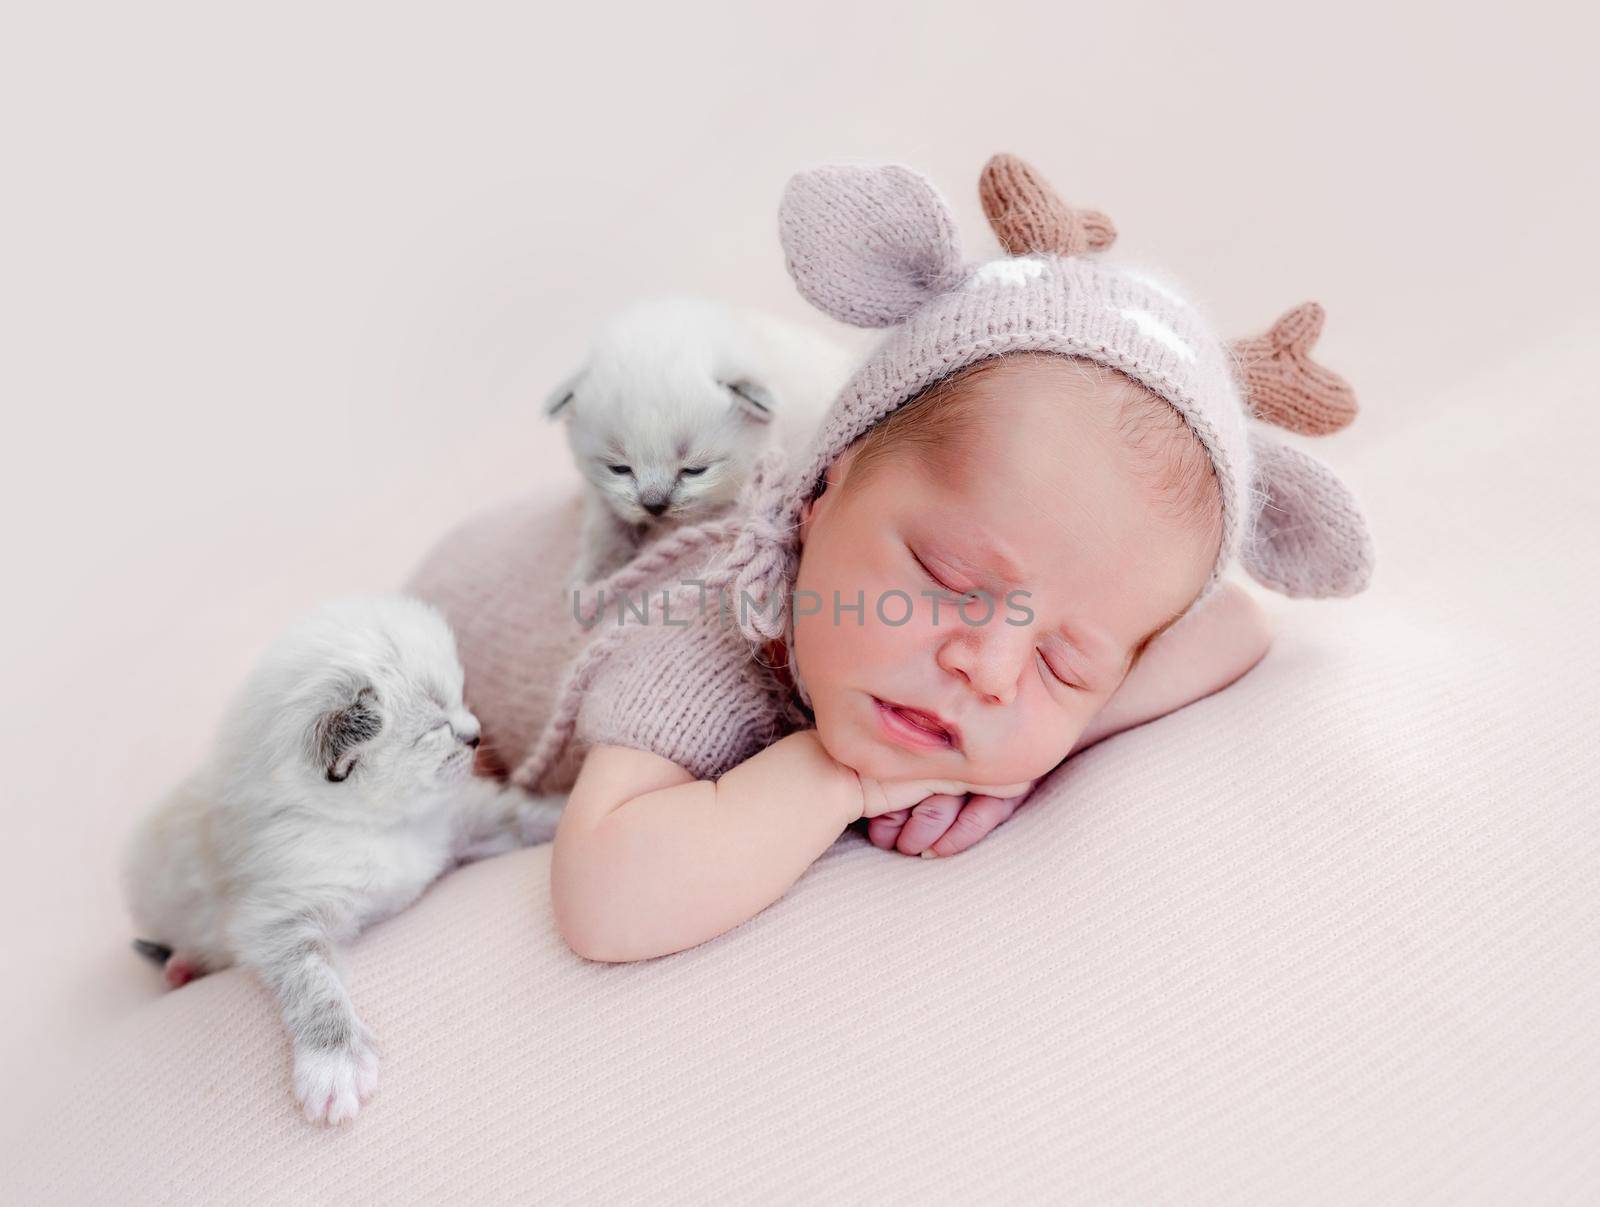 Adorable newborn baby boy sleeping on his tummy and two little fluffy kittens sitting close to him. Cute infant kid wearing knitted costume and hat napping with cats during studio photoshoot